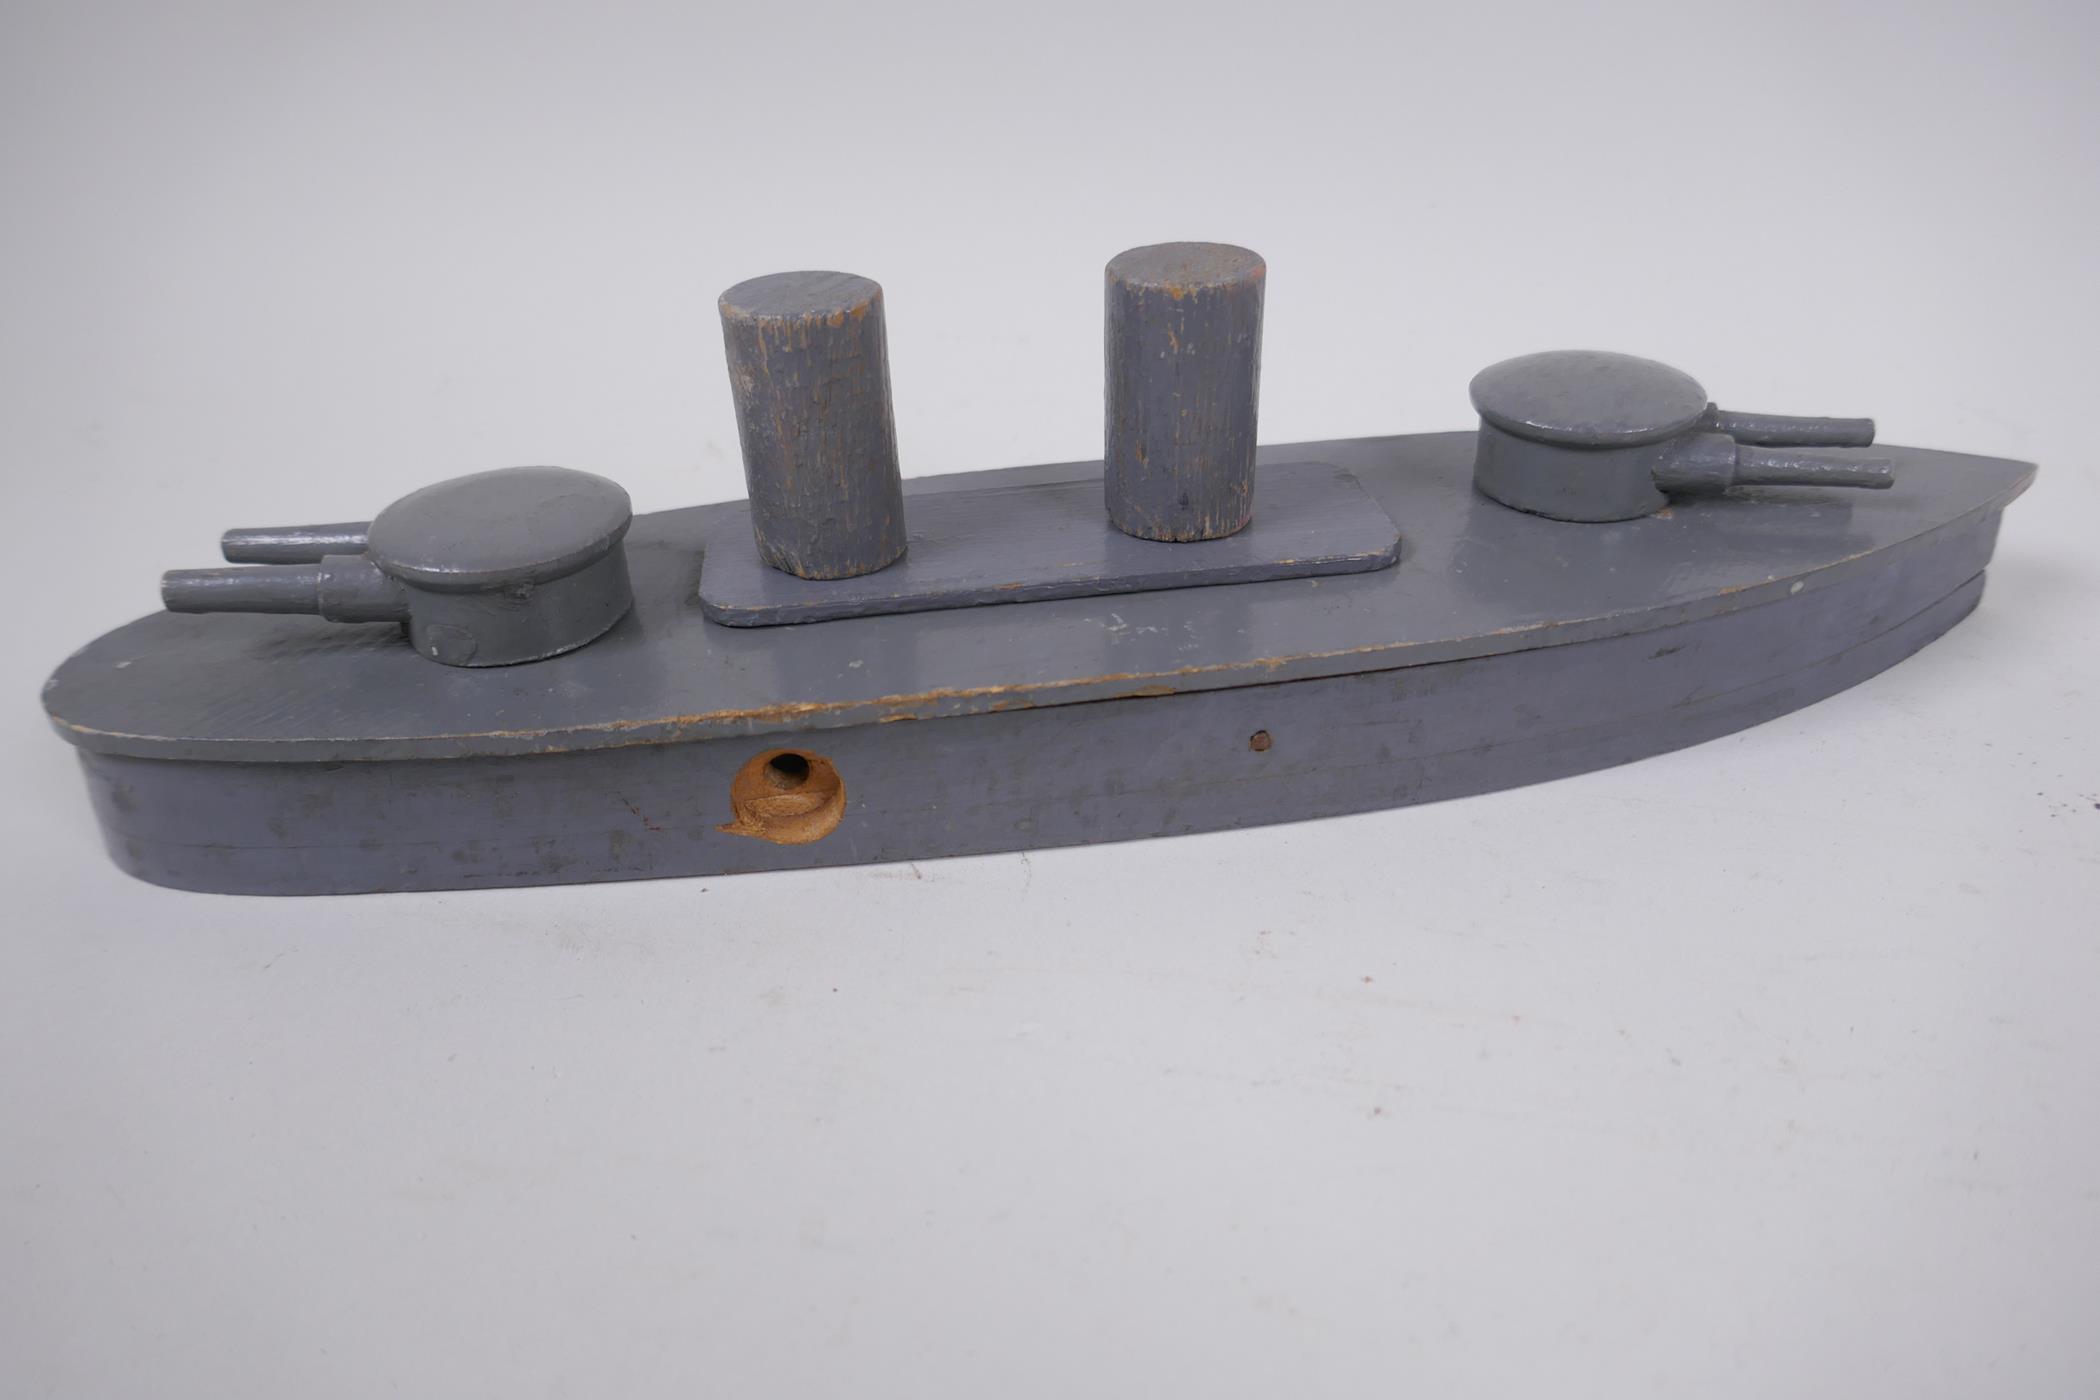 A wooden toy model of a battleship and submarine by Schoenhut, c1914, battleship 29cm, missing - Image 3 of 5